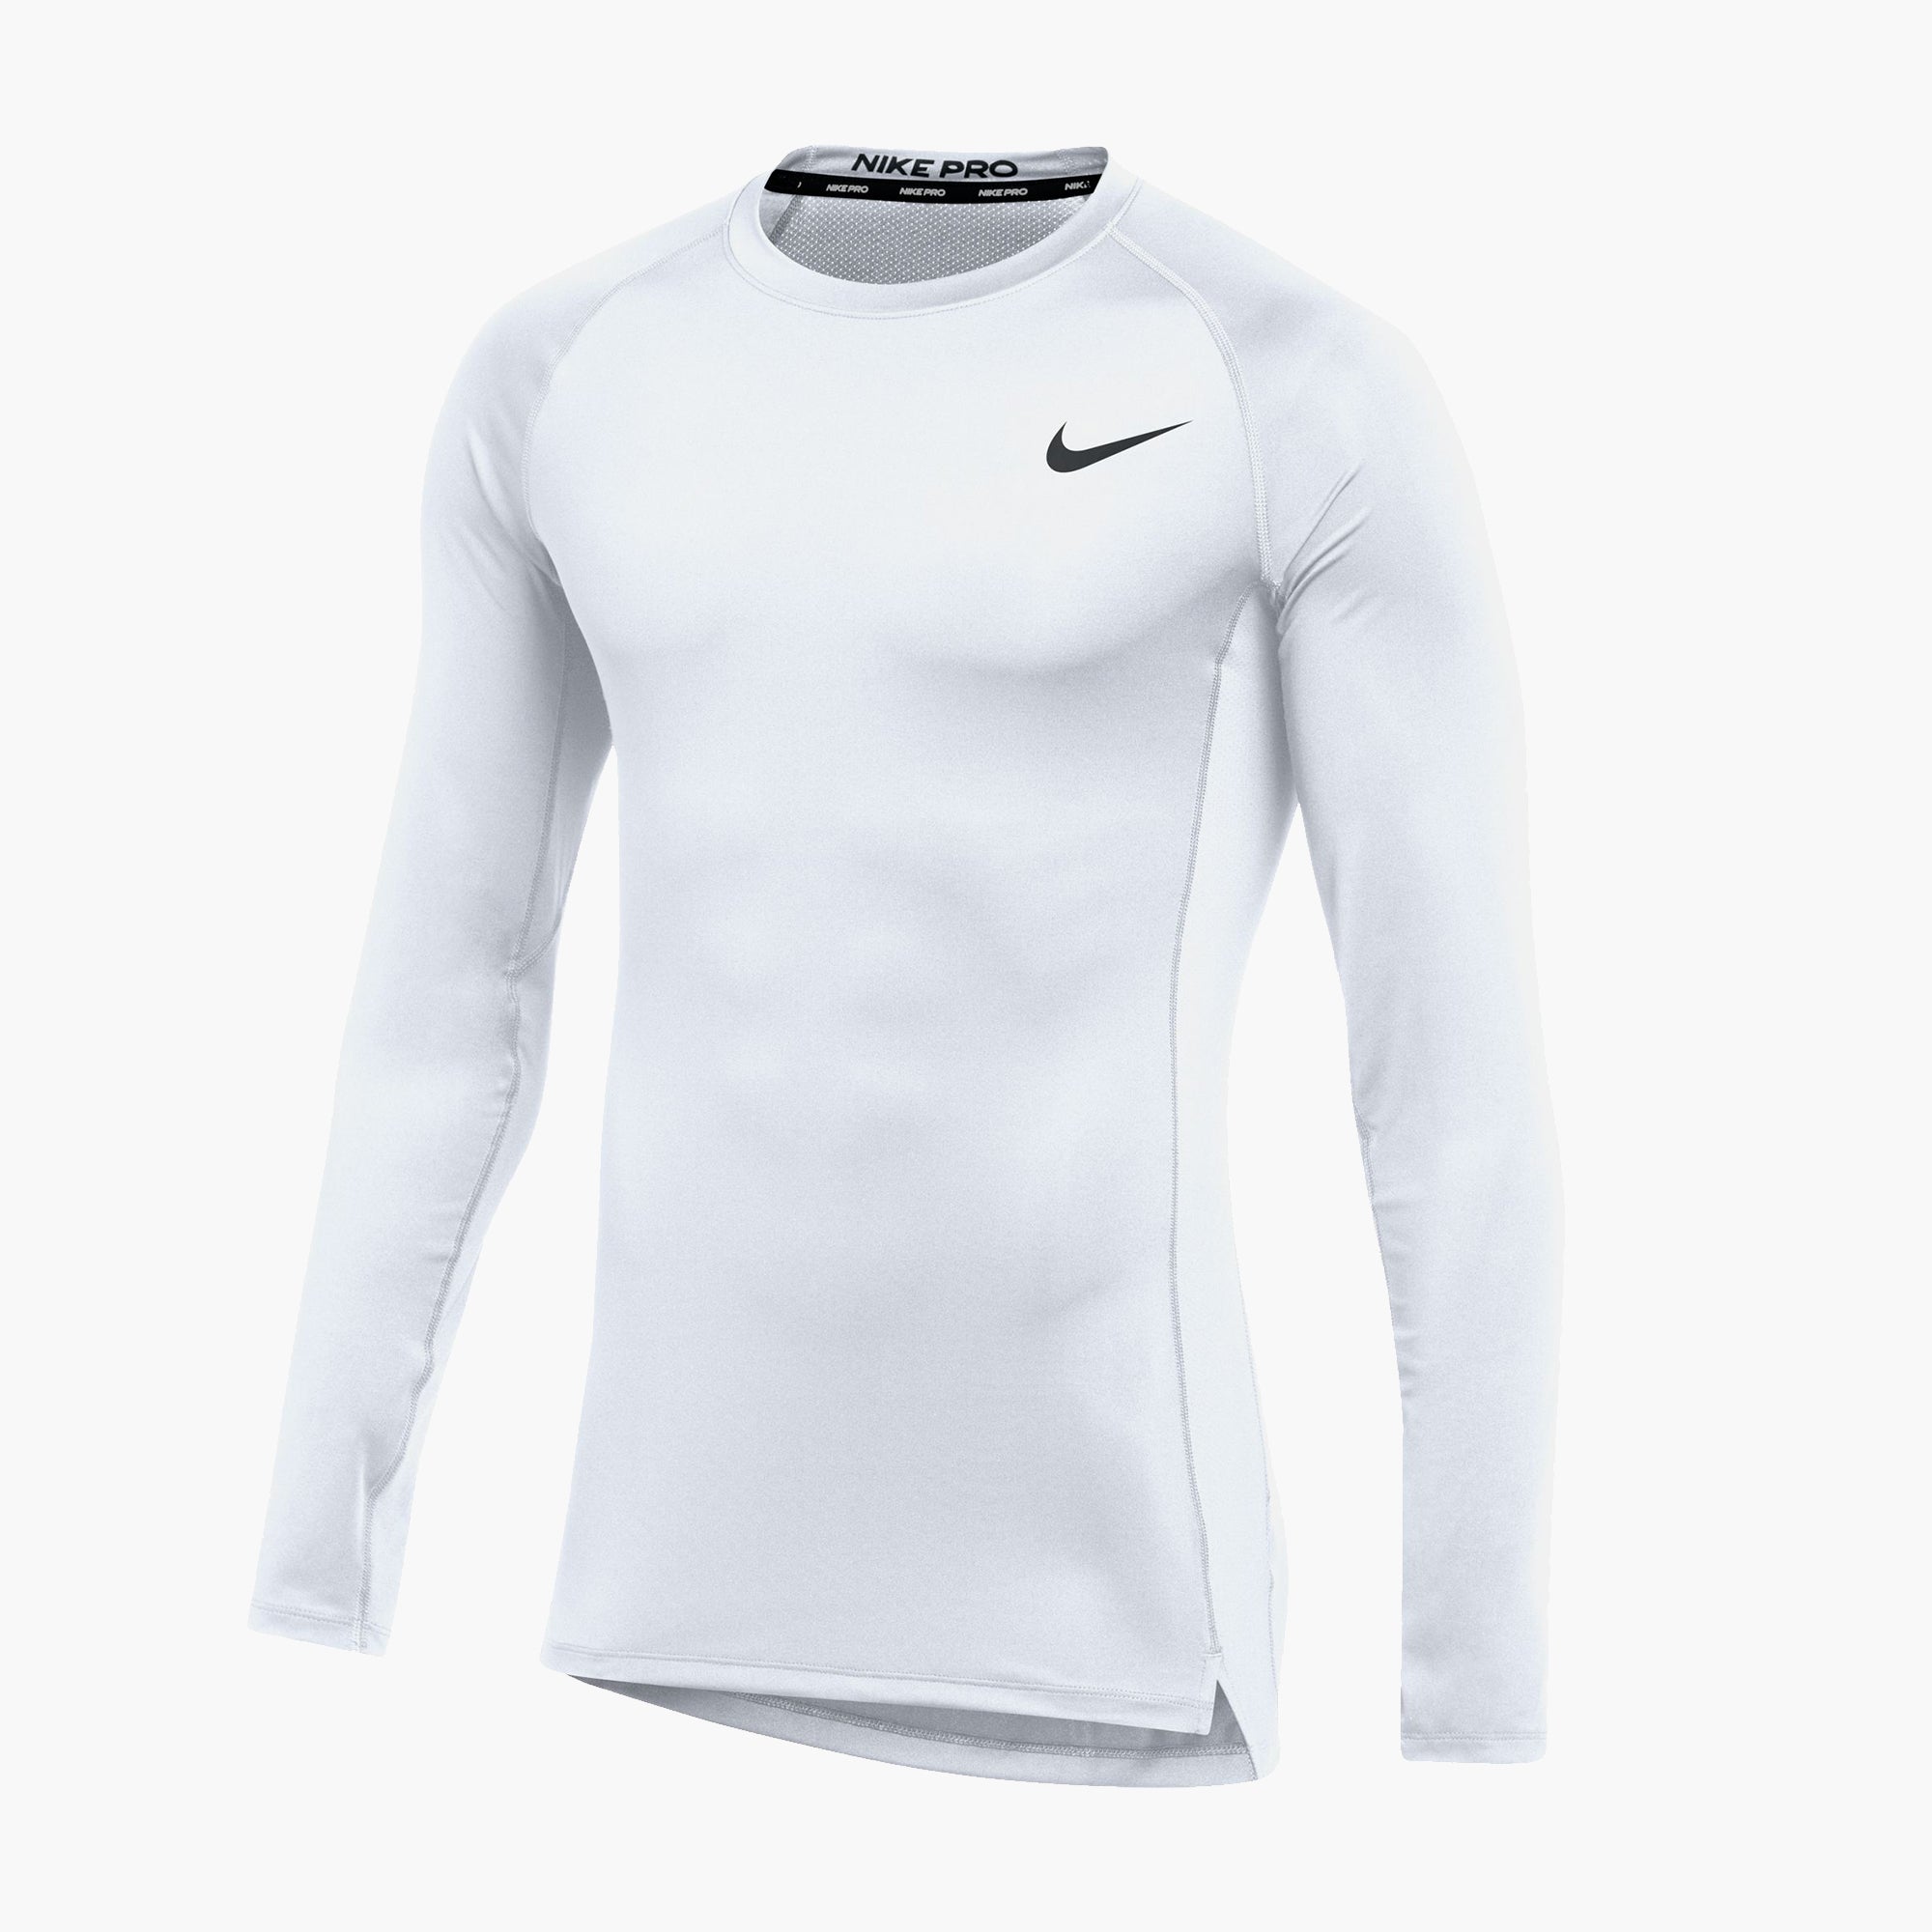 Smeren Toepassing een Nike Pro Tight Long Sleeve Base Layer Compression Shirt Men's